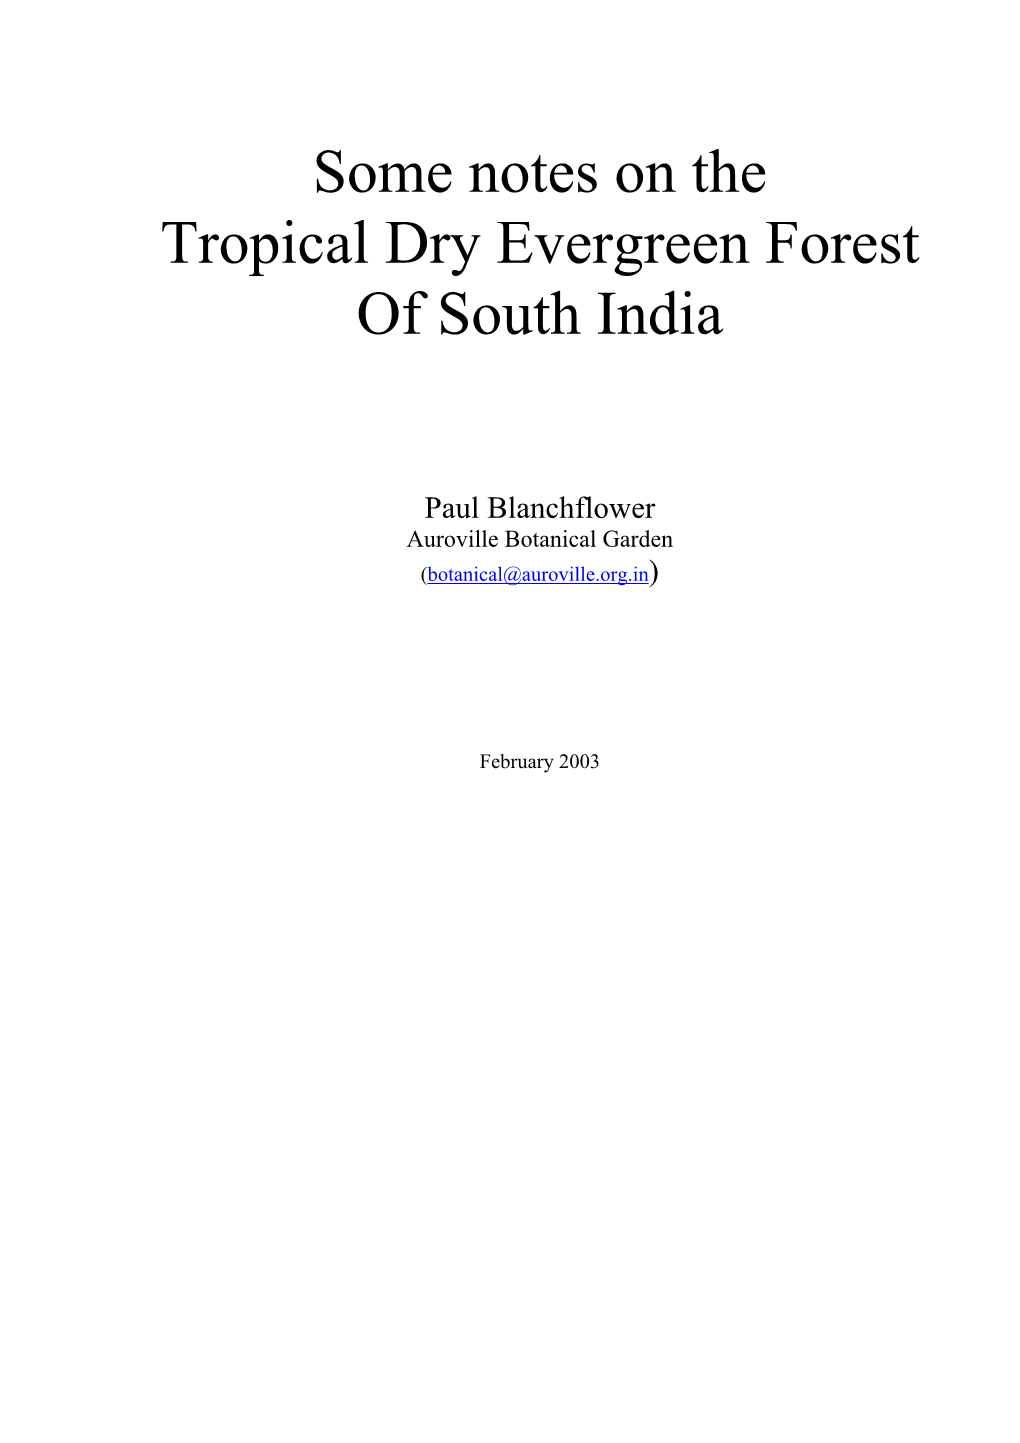 Some Notes on the Tropical Dry Evergreen Forest of South India